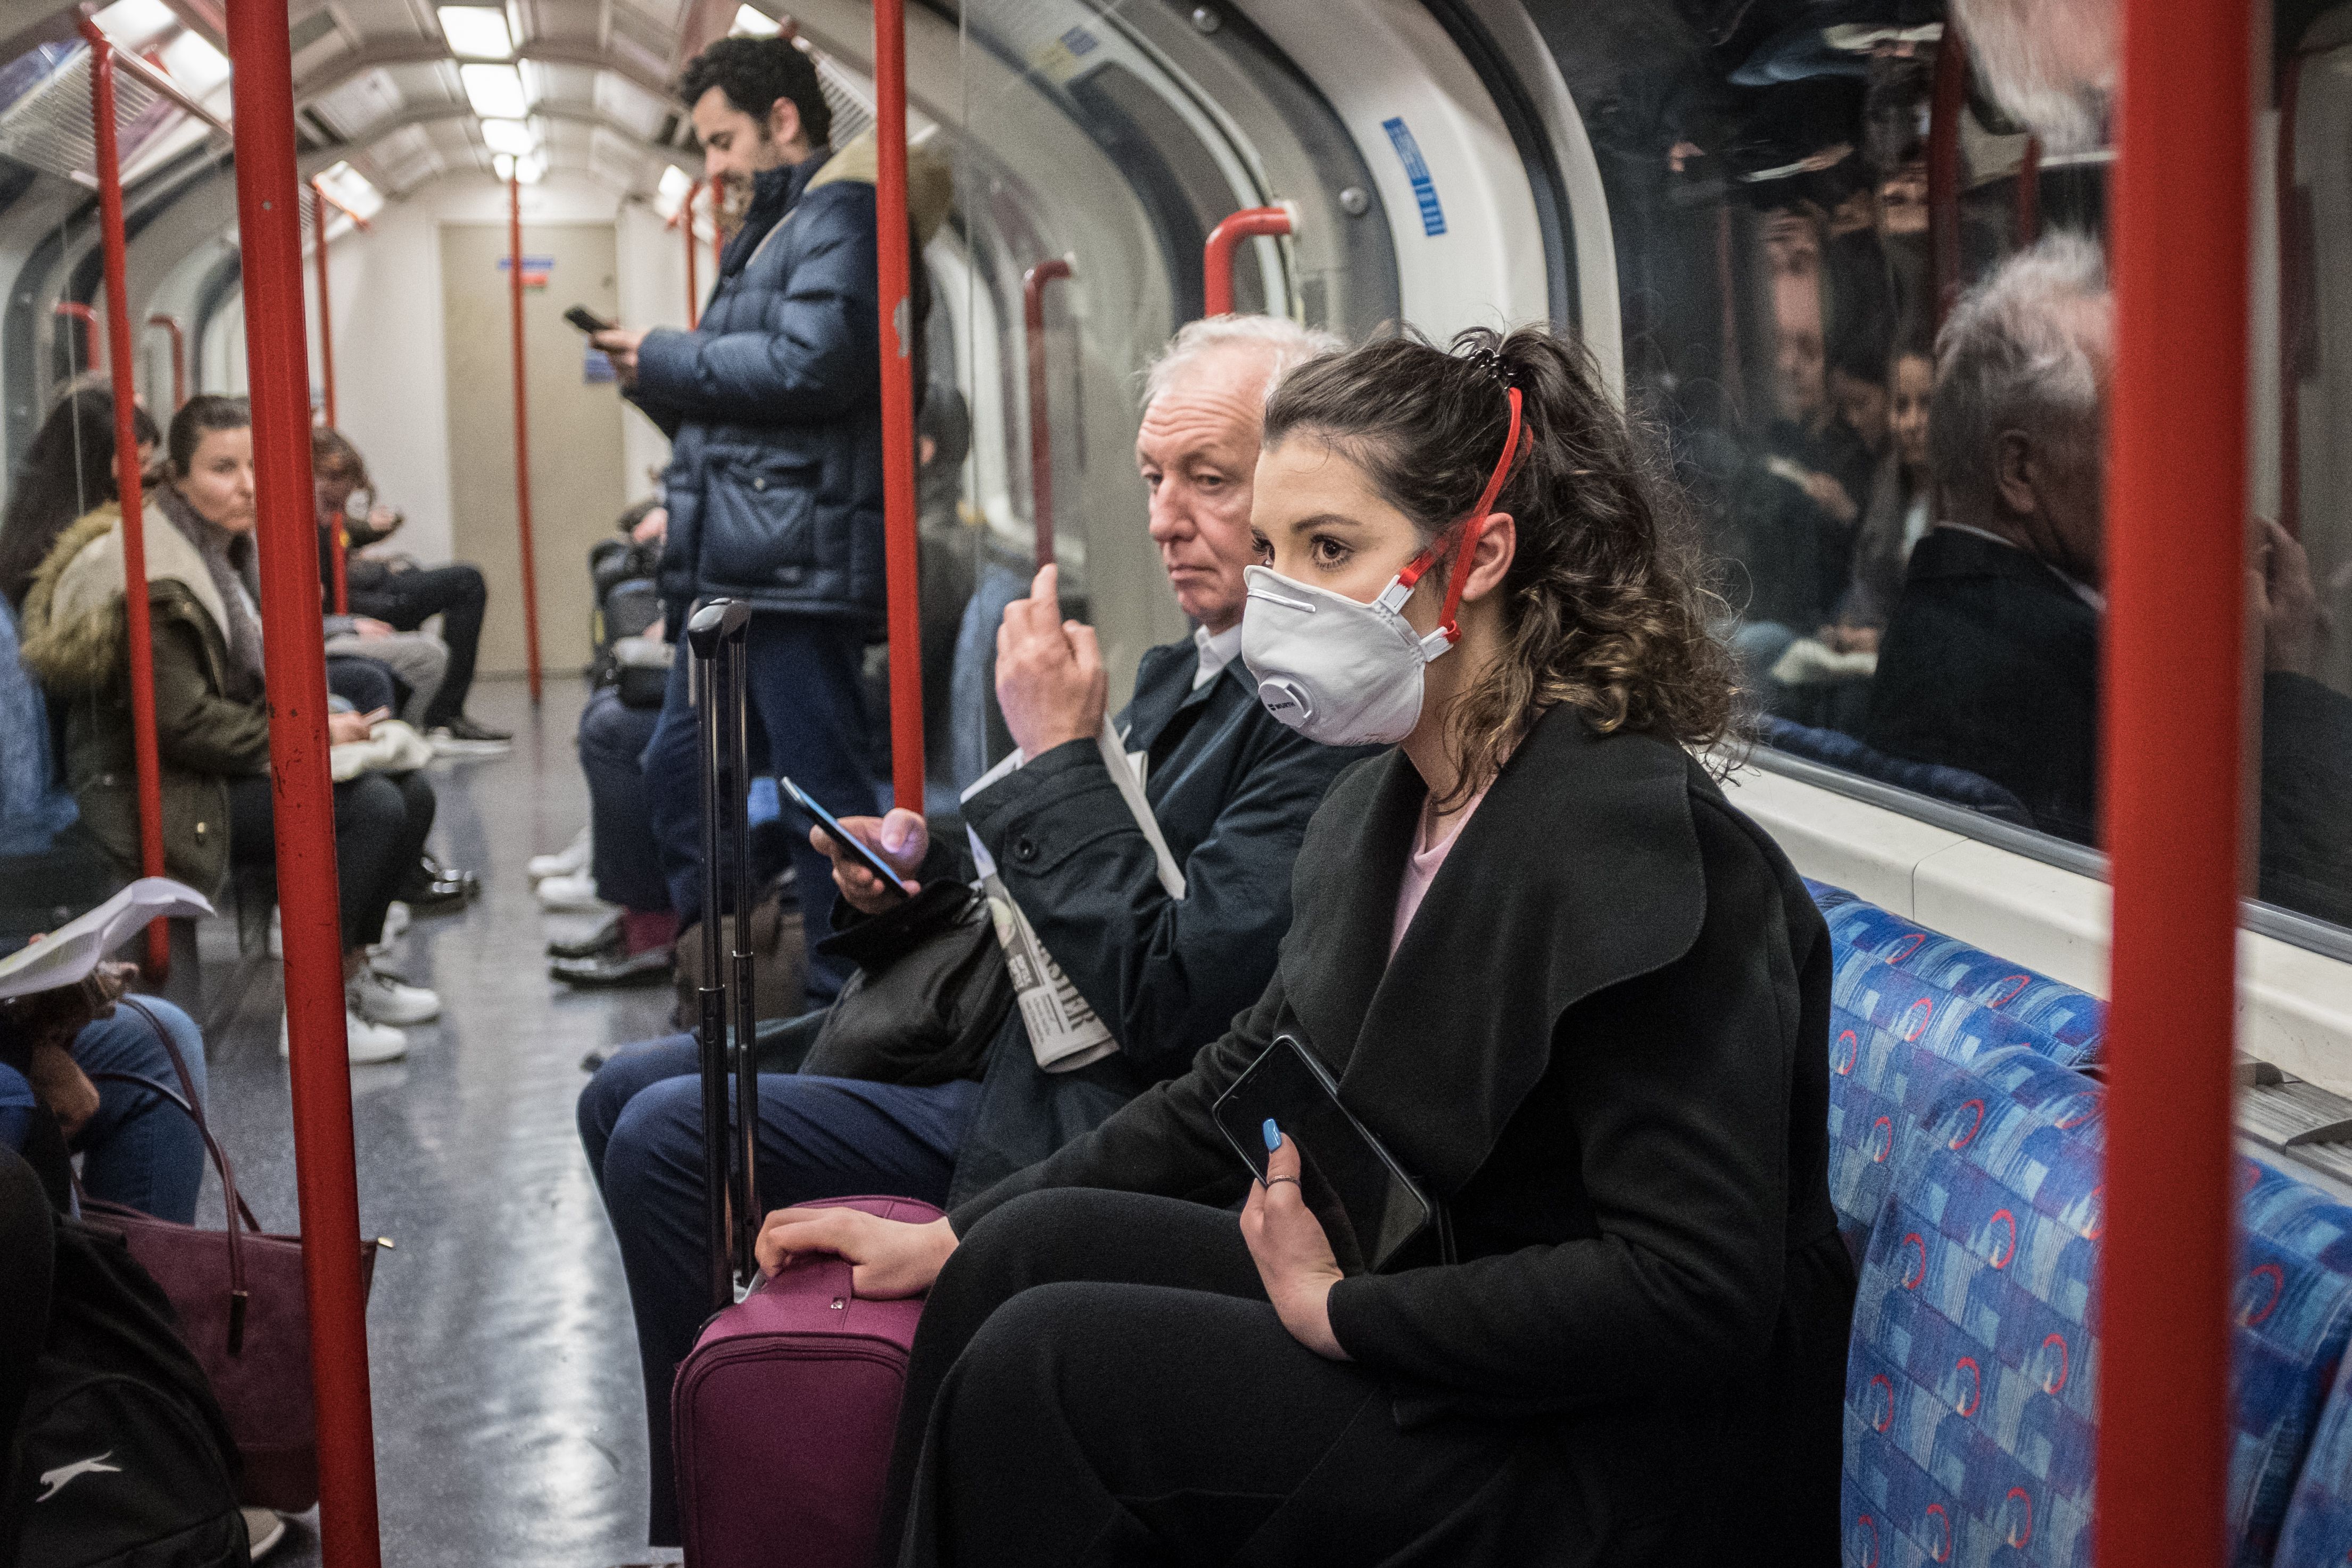 A woman seen on a tube wearing a face mask in London